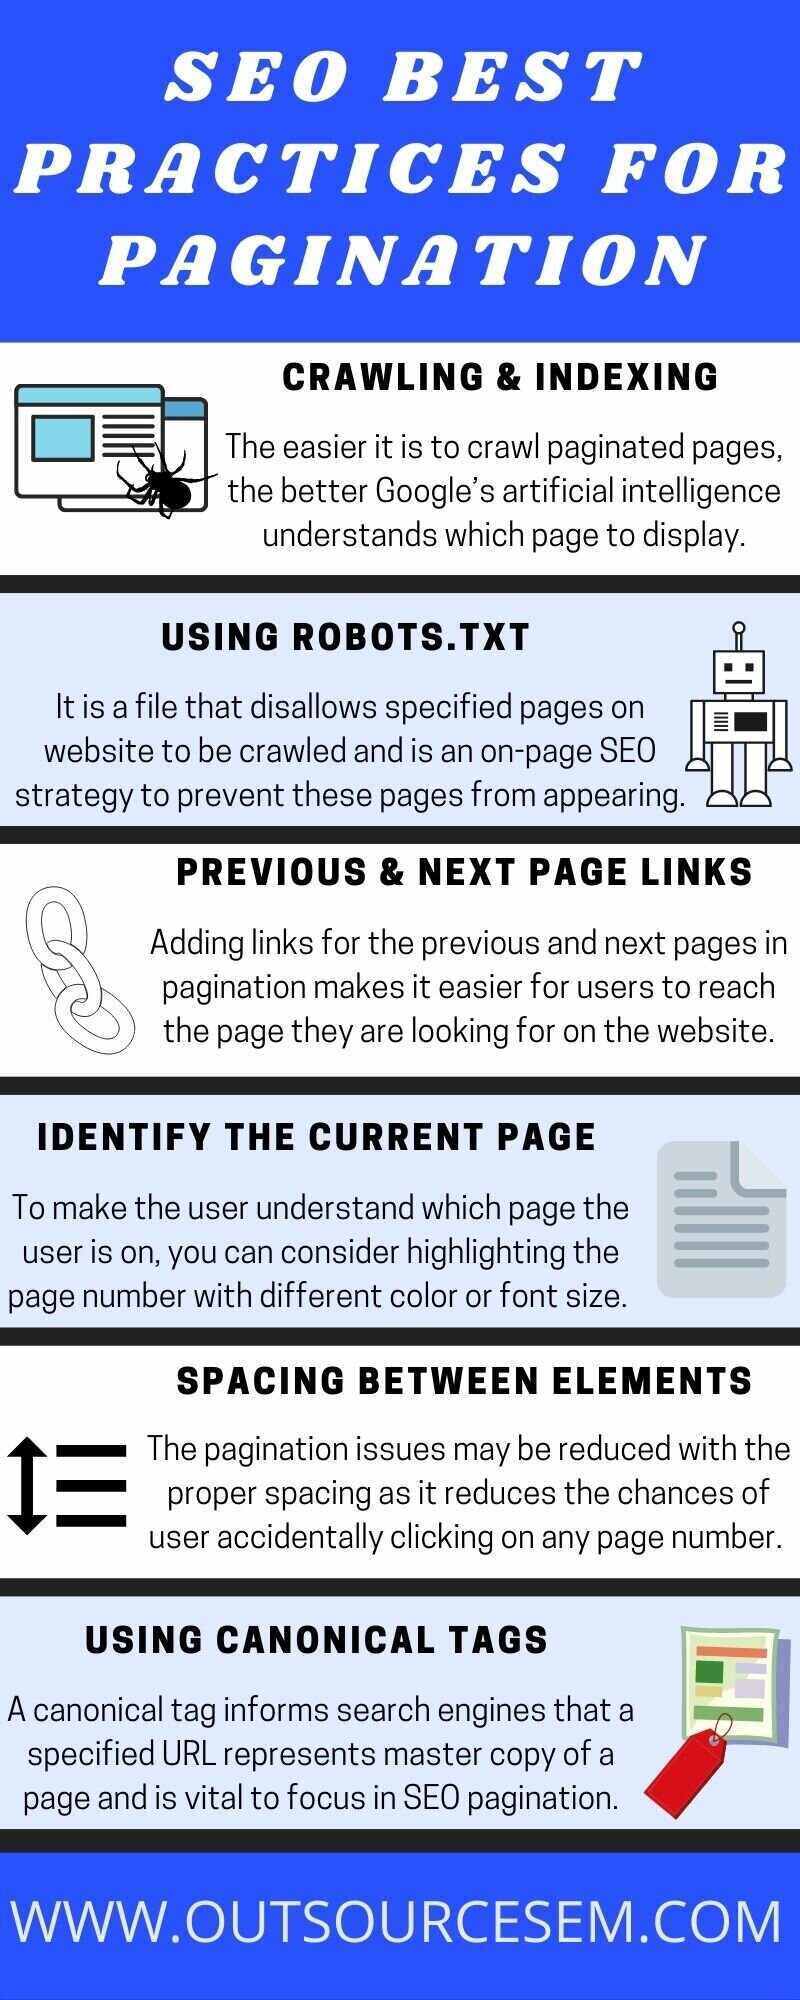 SEO best practices for pagination